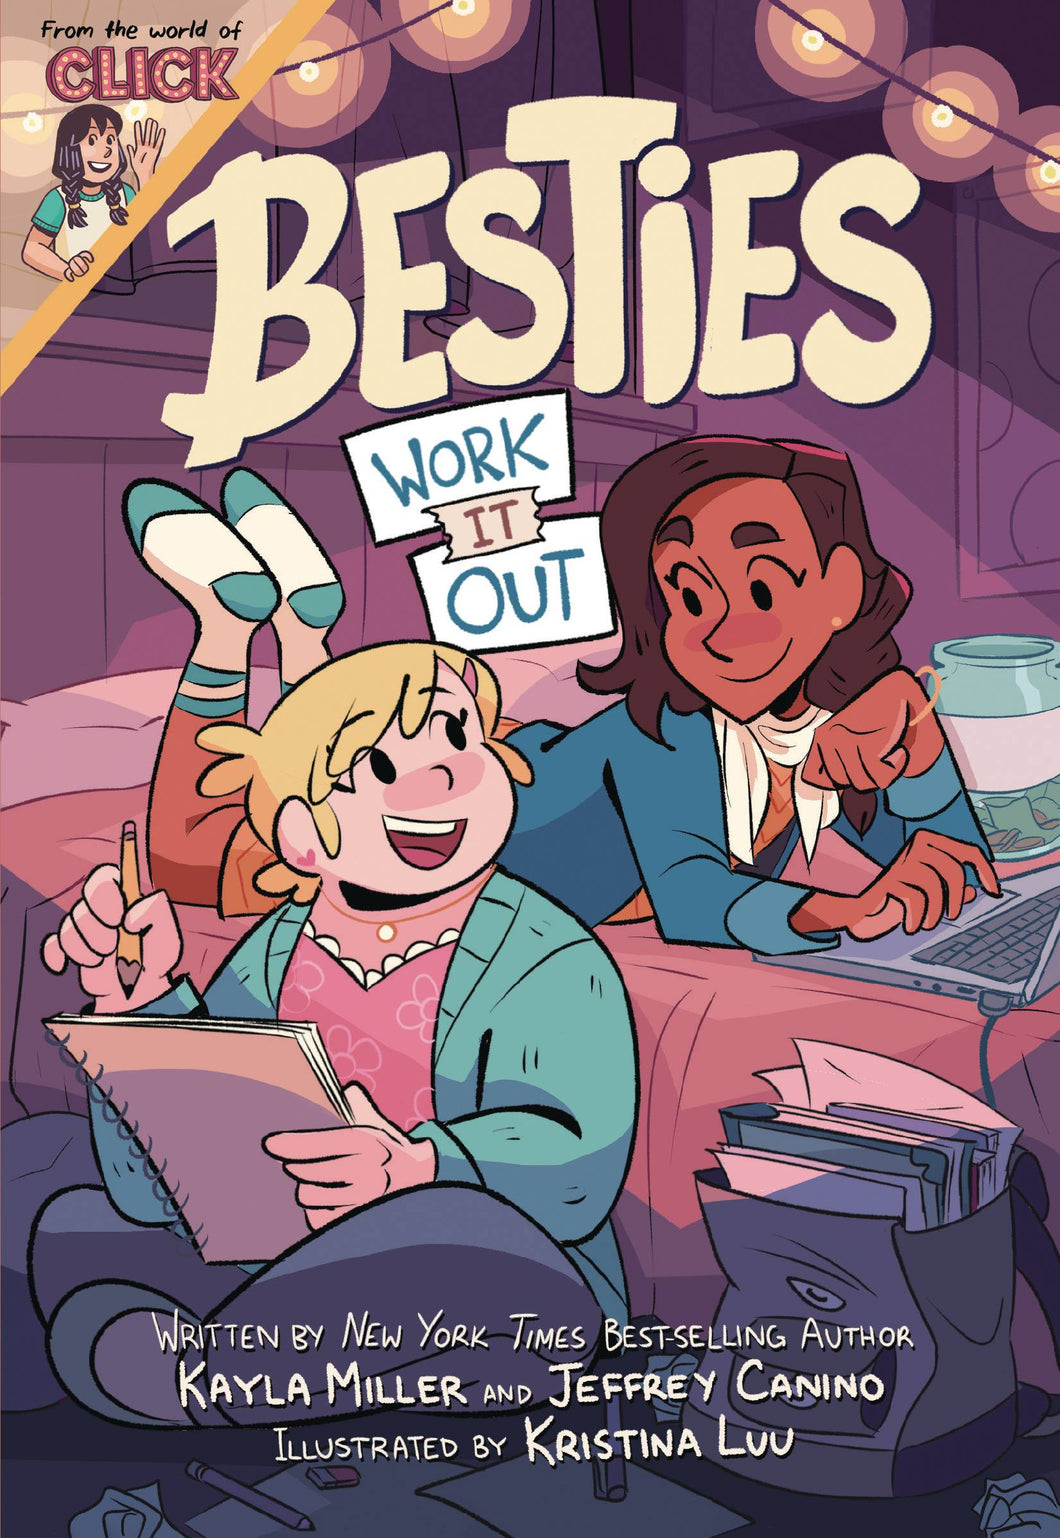 Besties GN Vol 01 Work It Out - Books